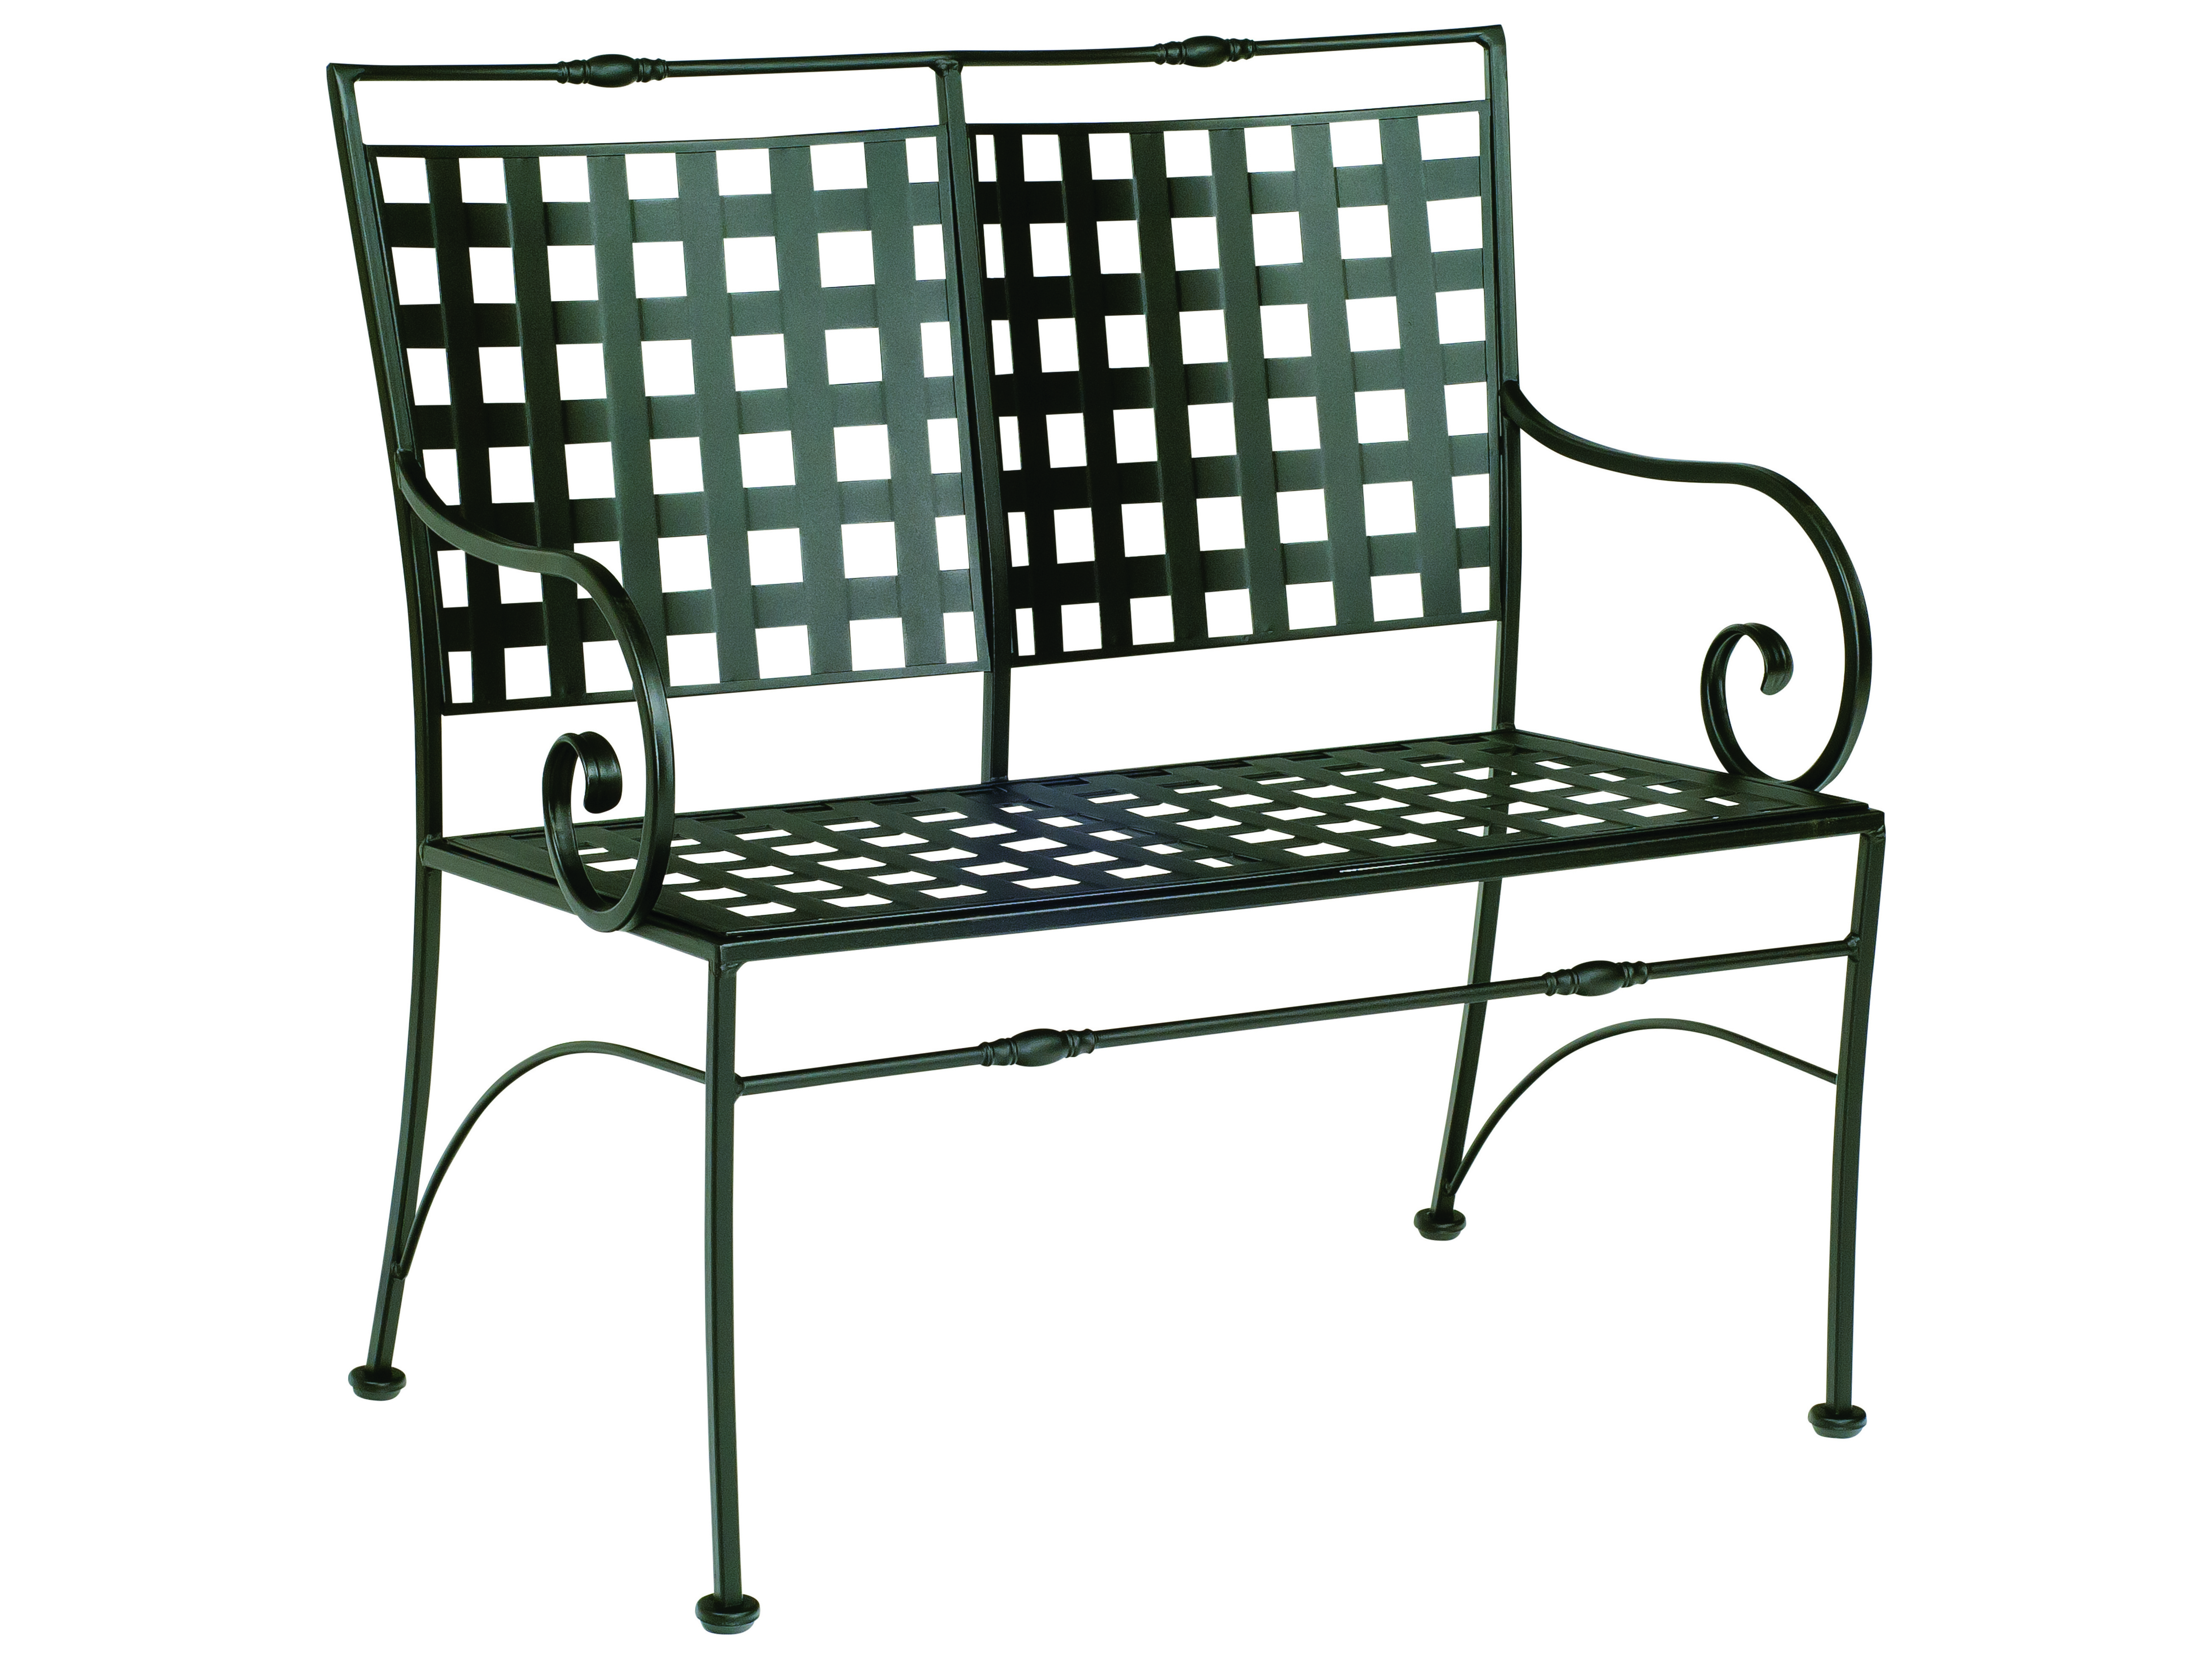 Woodard Sheffield Wrought Iron Bench With Cushion Wr3c0004st